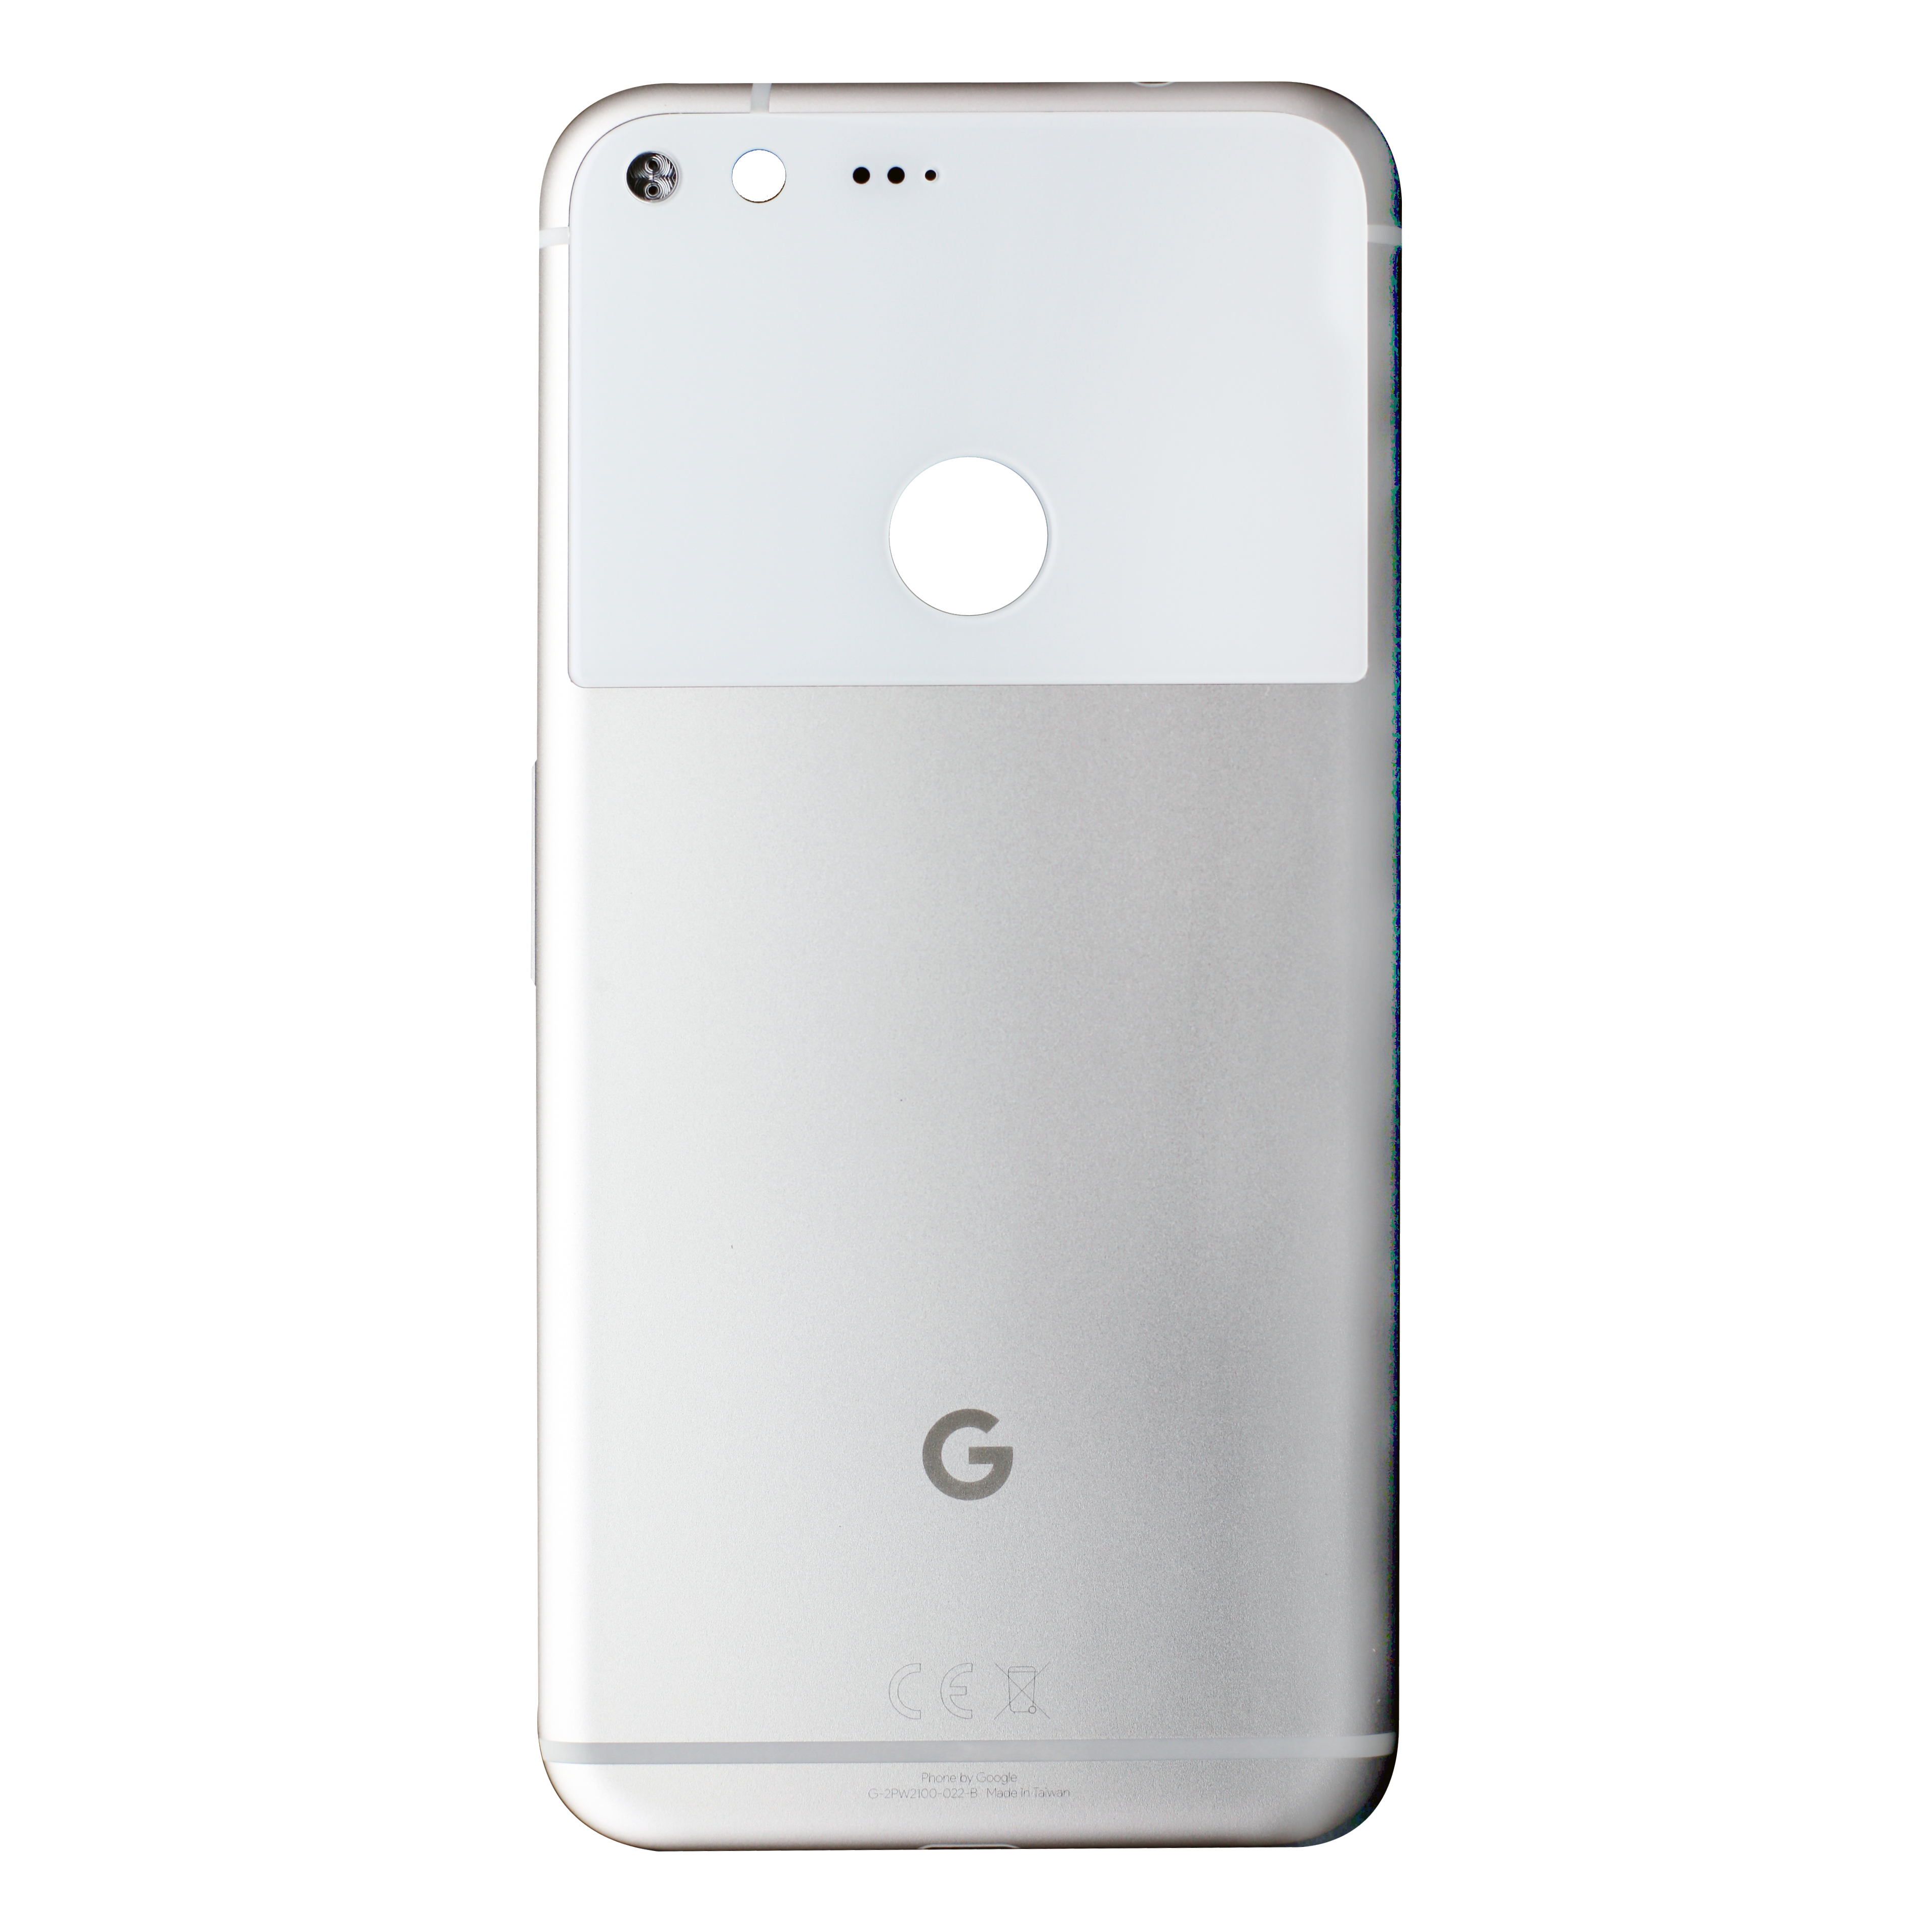 Back Glass for use with Google Pixel 2 XL (White)